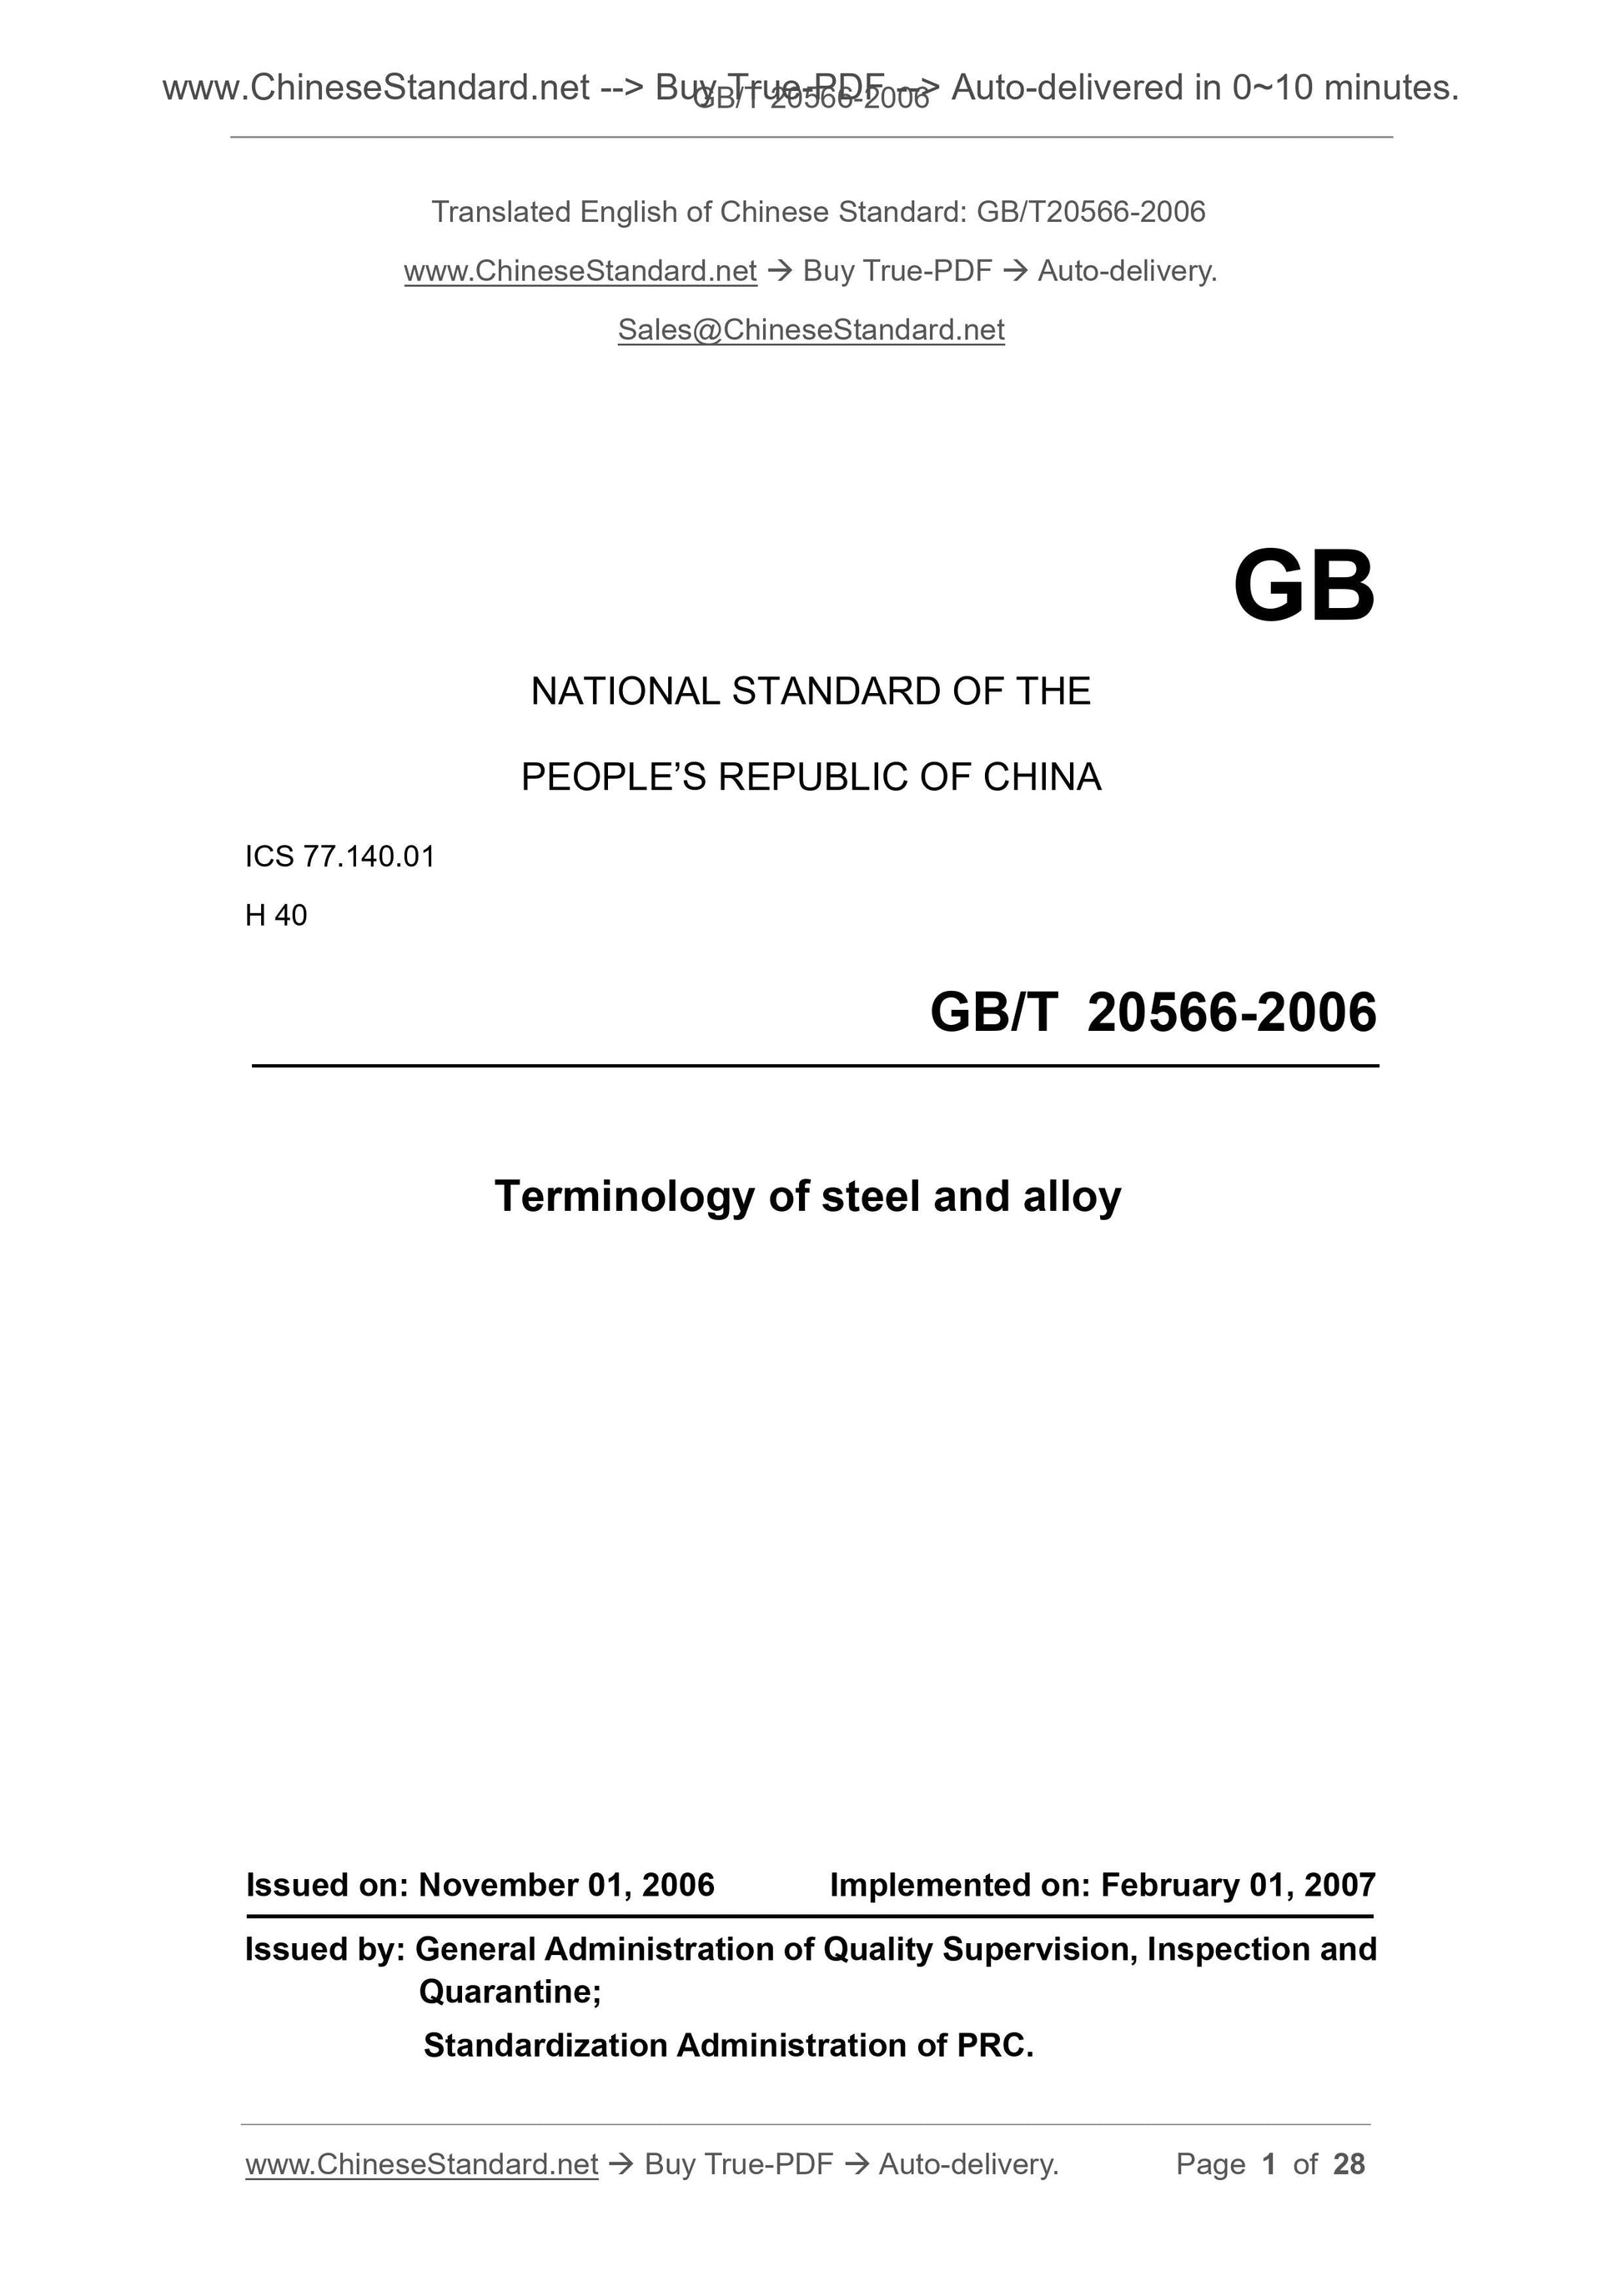 GB/T 20566-2006 Page 1